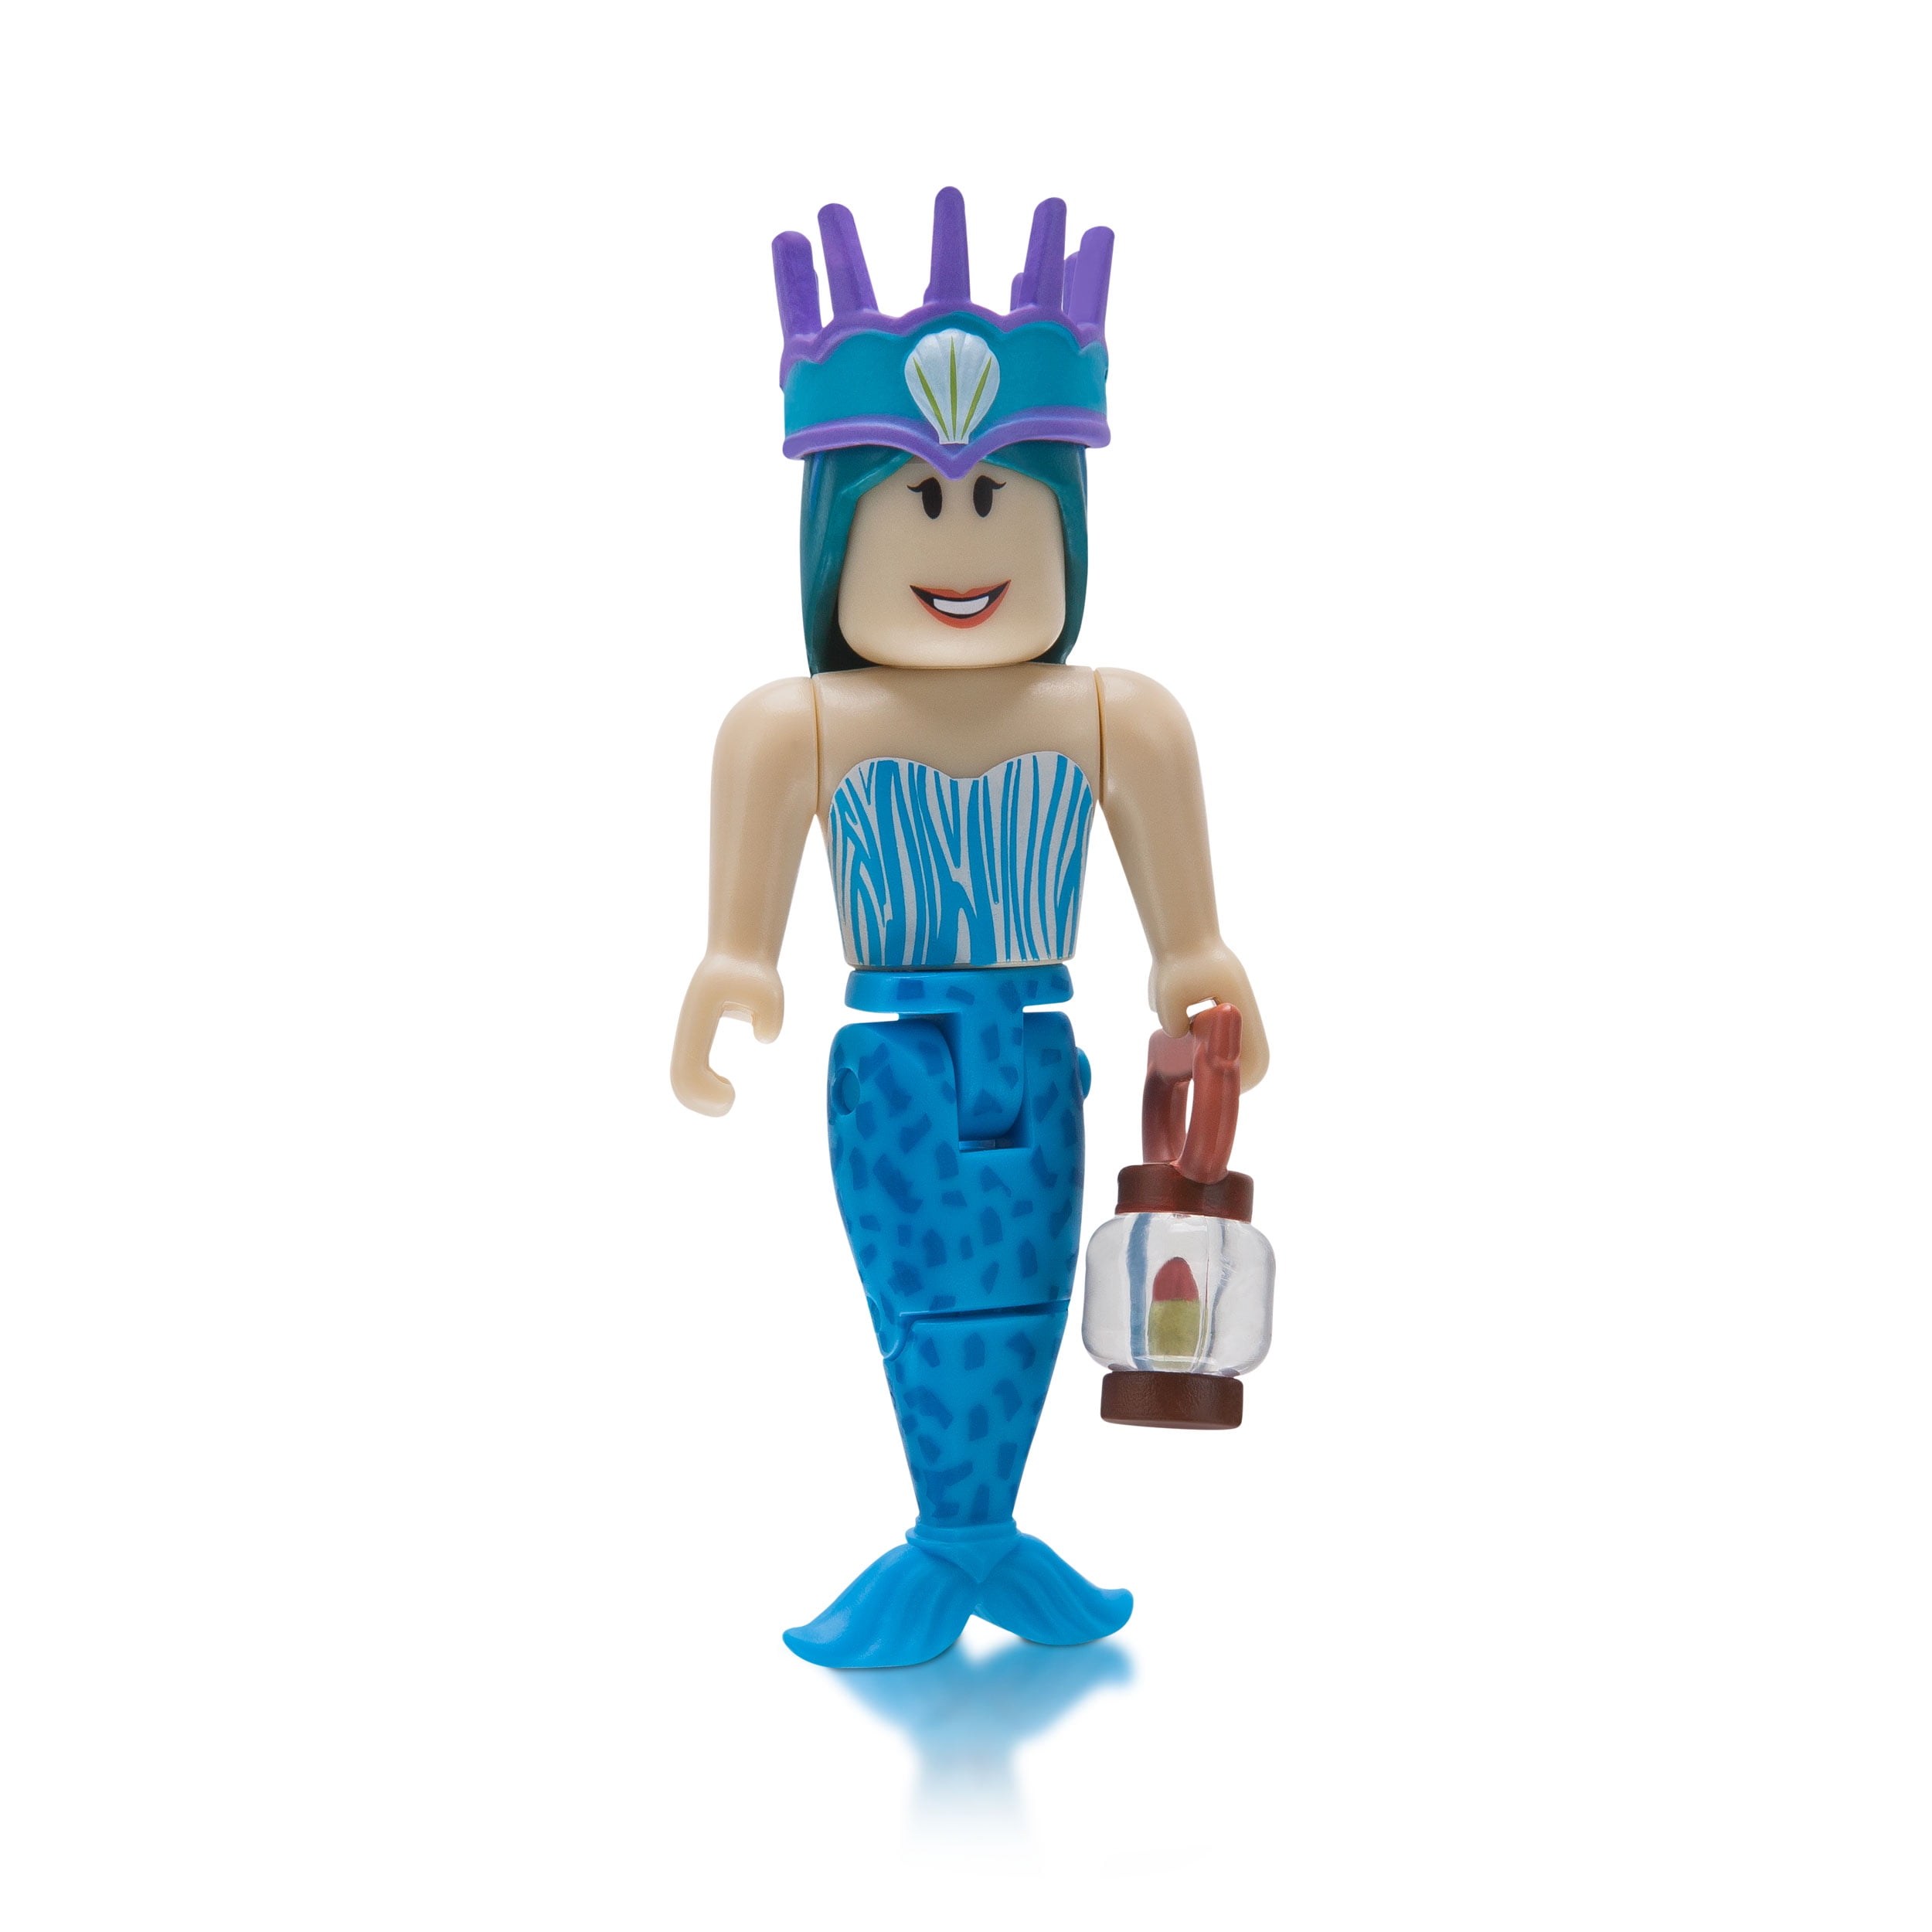 Roblox Celebrity Collection Neverland Lagoon Crown Collector Figure Pack Includes Exclusive Virtual Item Walmart Com Walmart Com - details about roblox neverland lagoon 4 figure pack virtual item code brand new